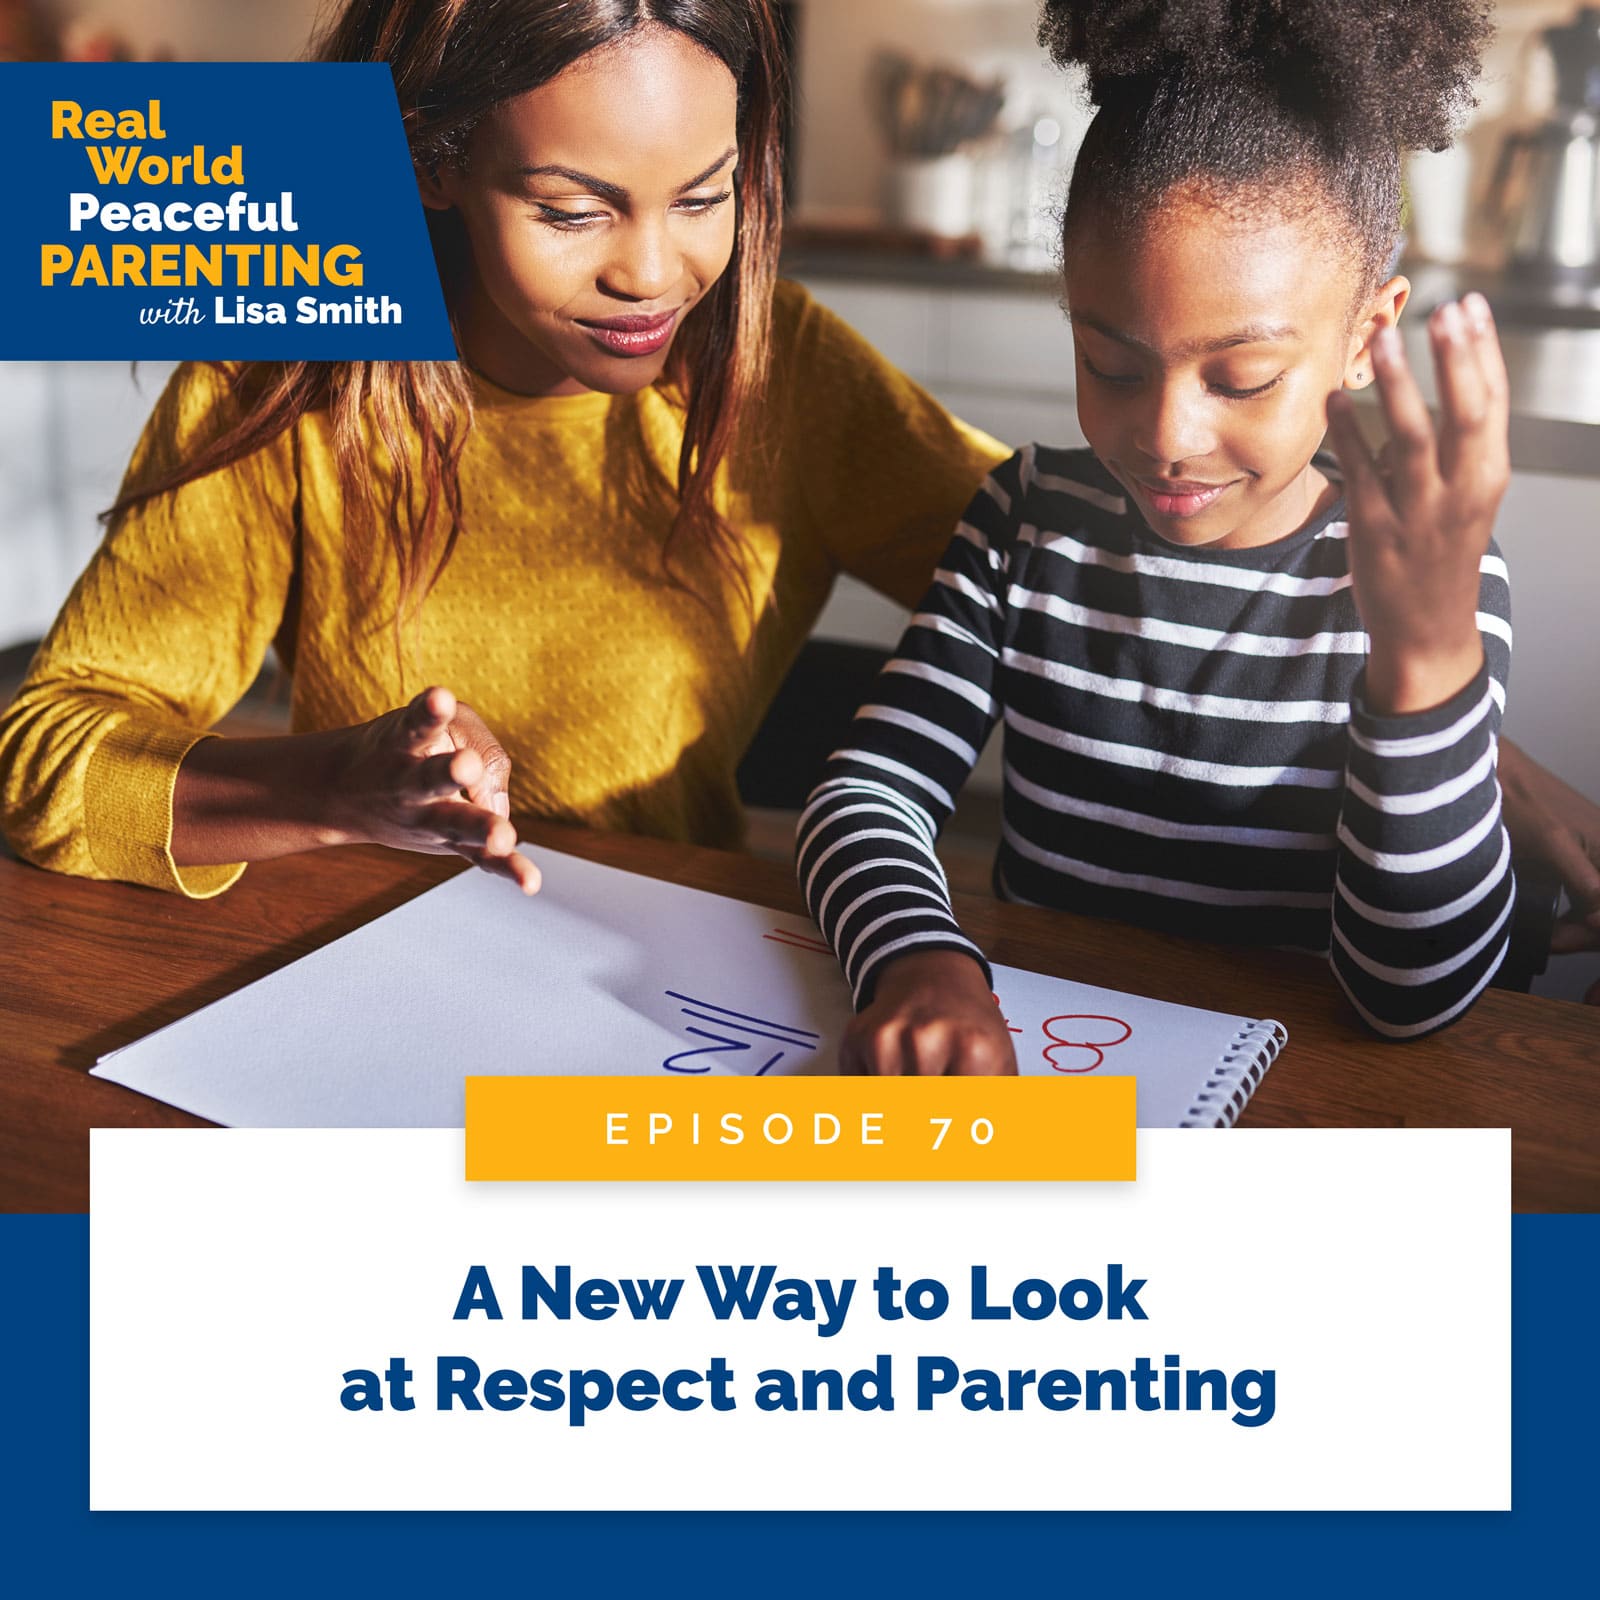 Real World Peaceful Parenting | New Way to Look at Respect Parenting